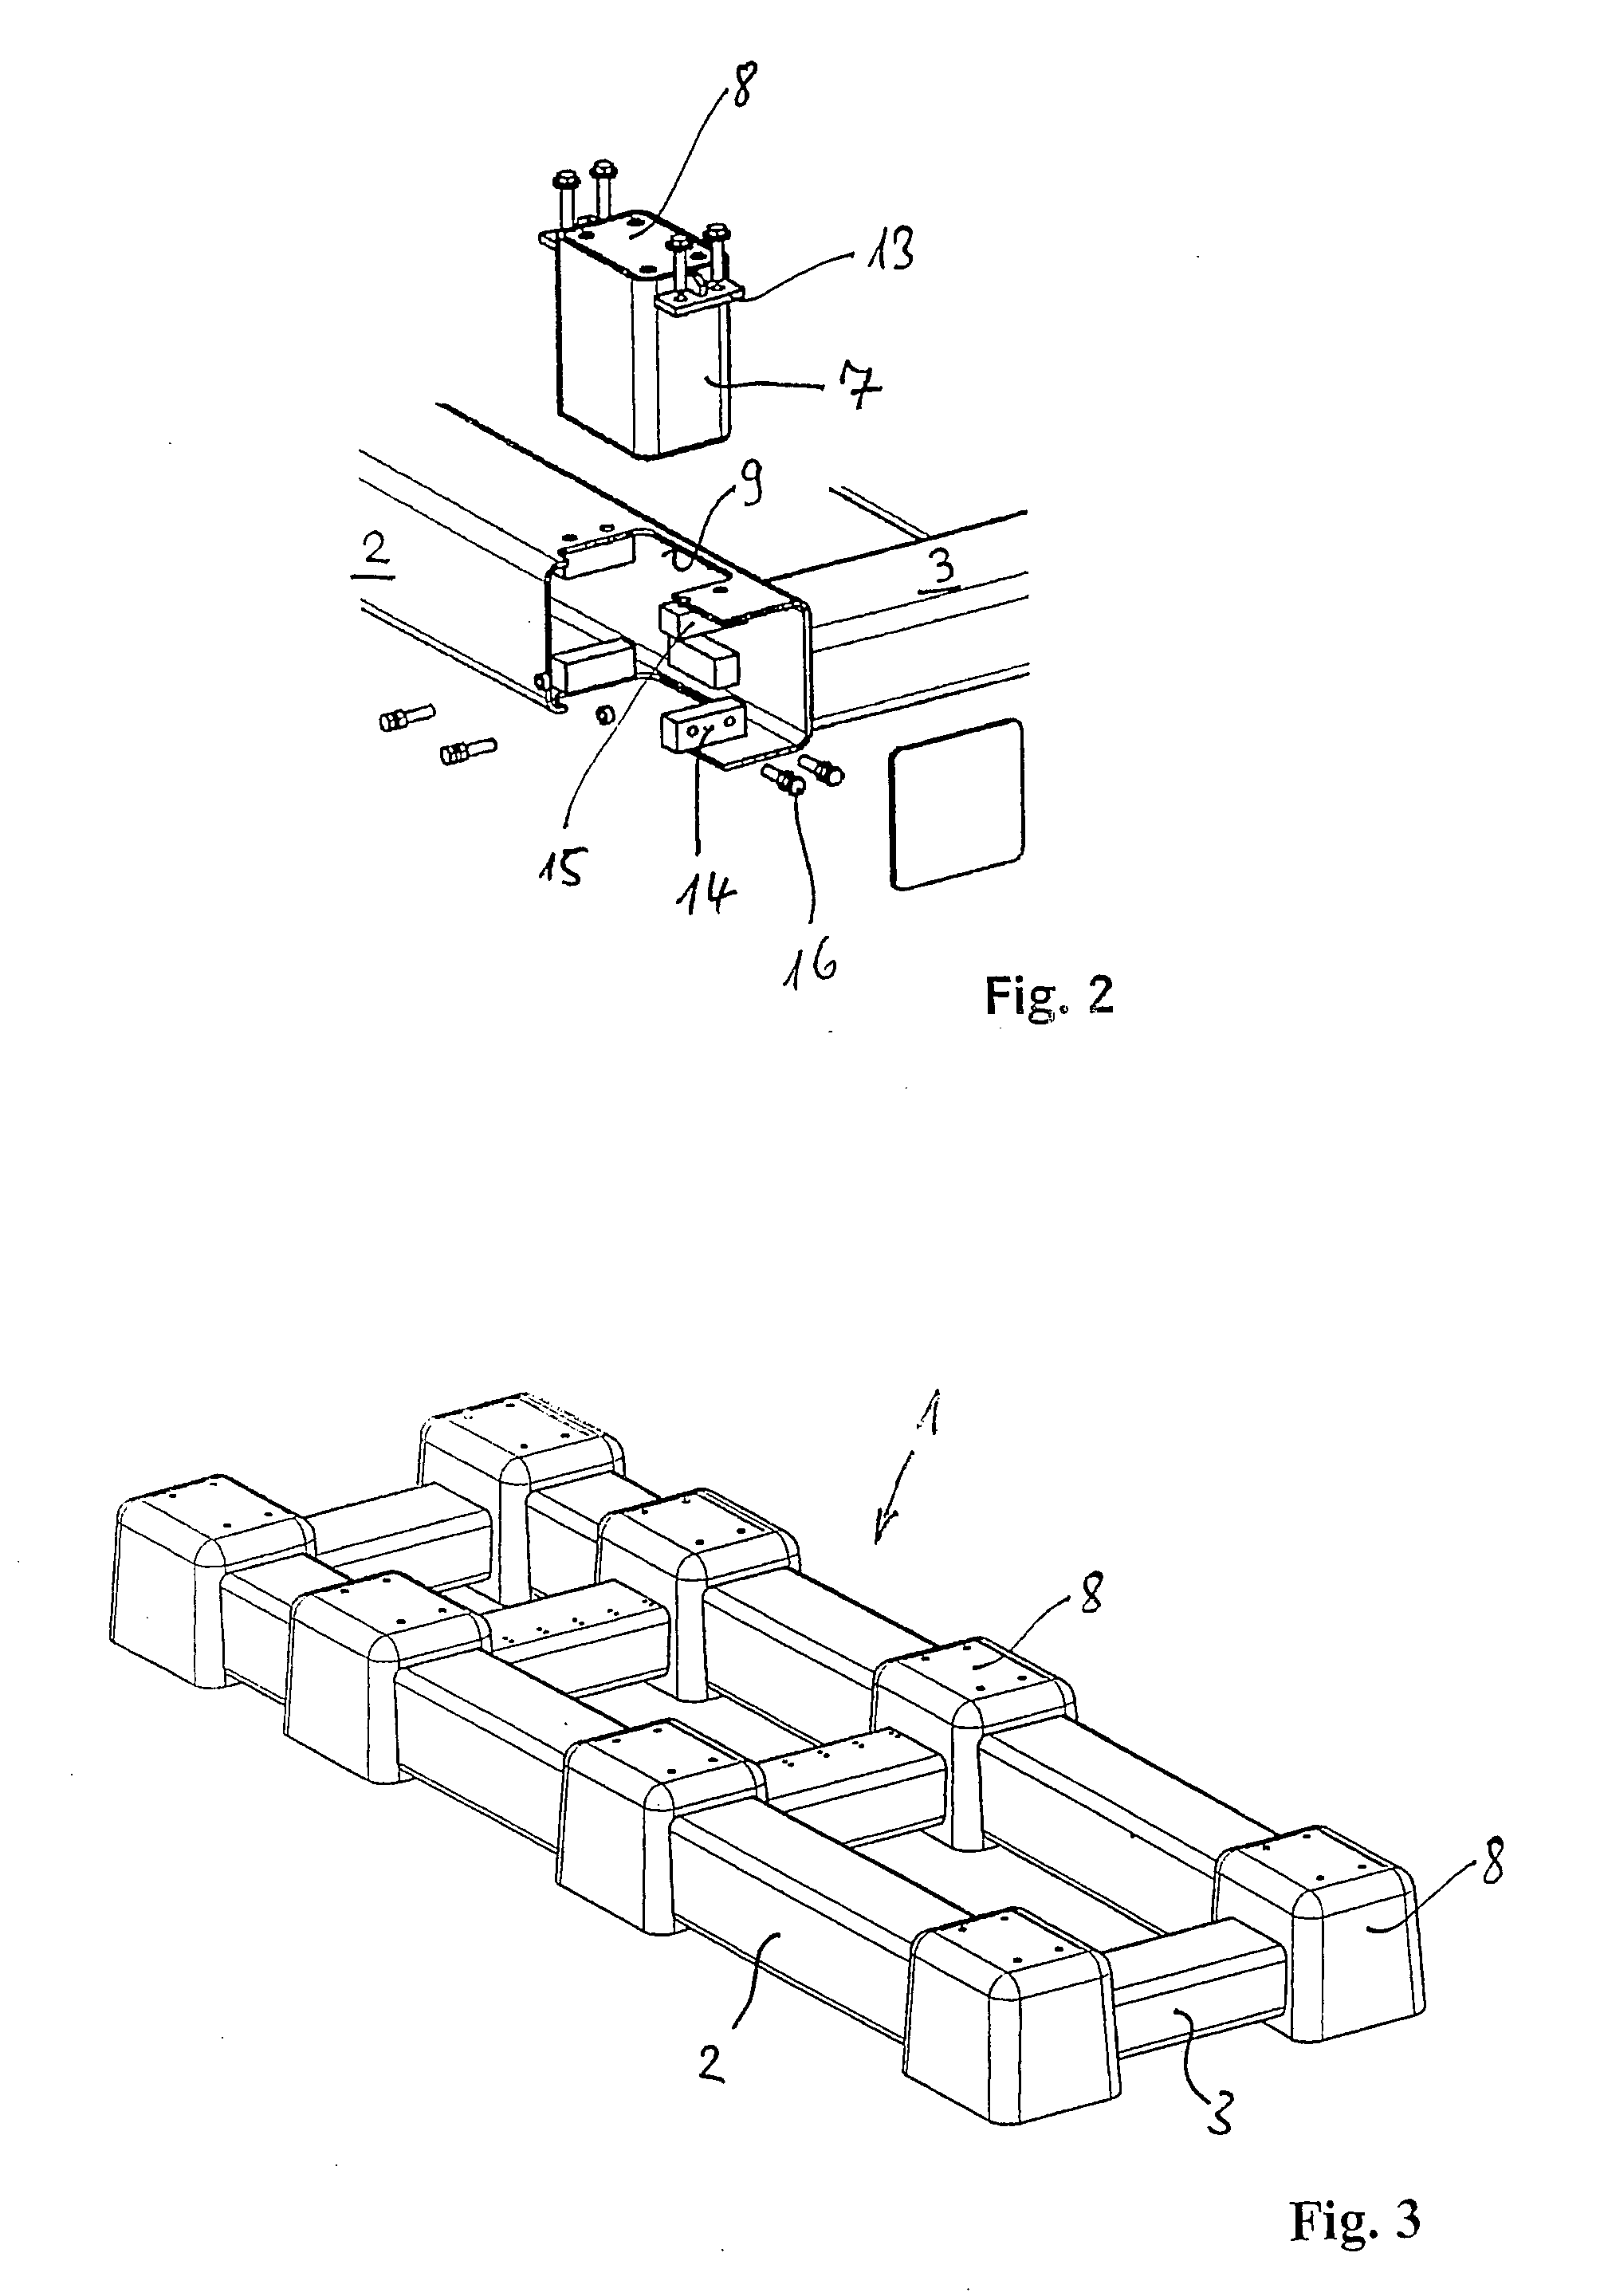 Support frame including longitudinal and transverse beams and method for producing the frame